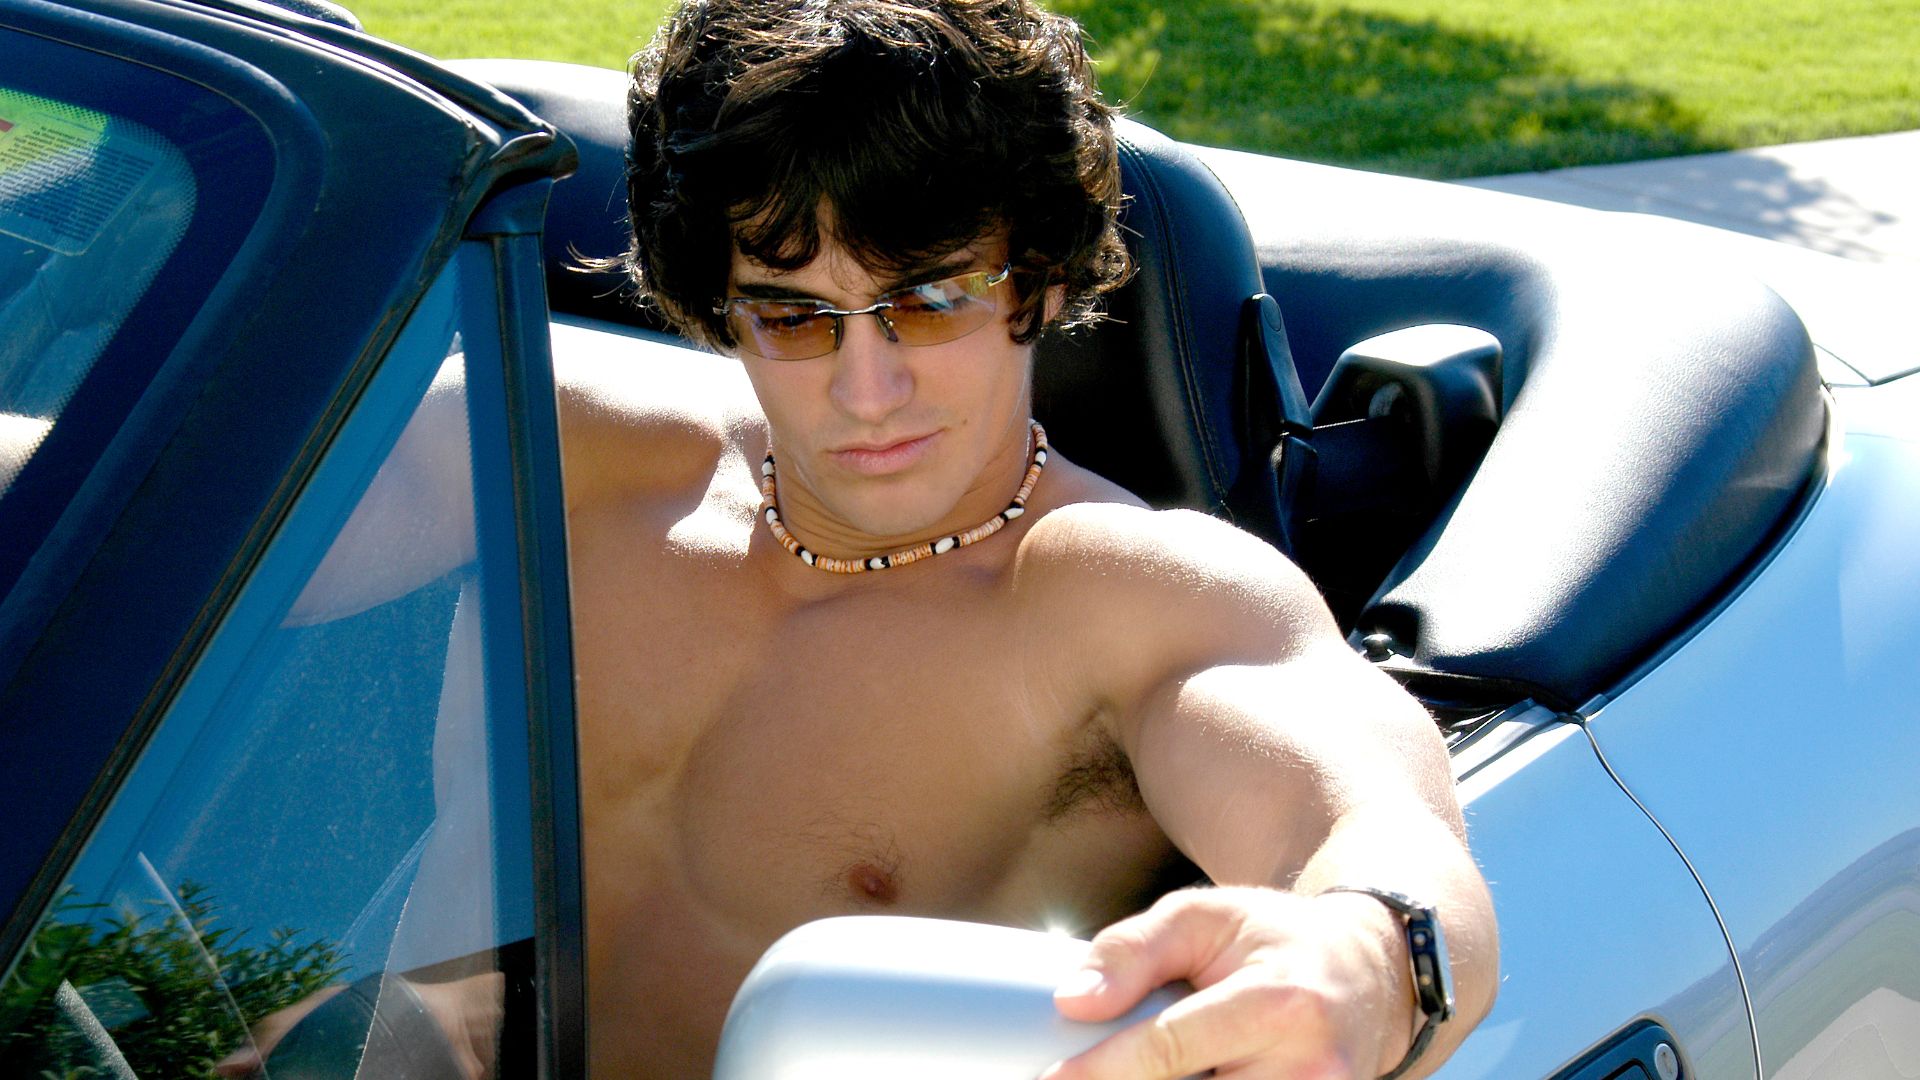 a shirtless young man leaning out of a car window.